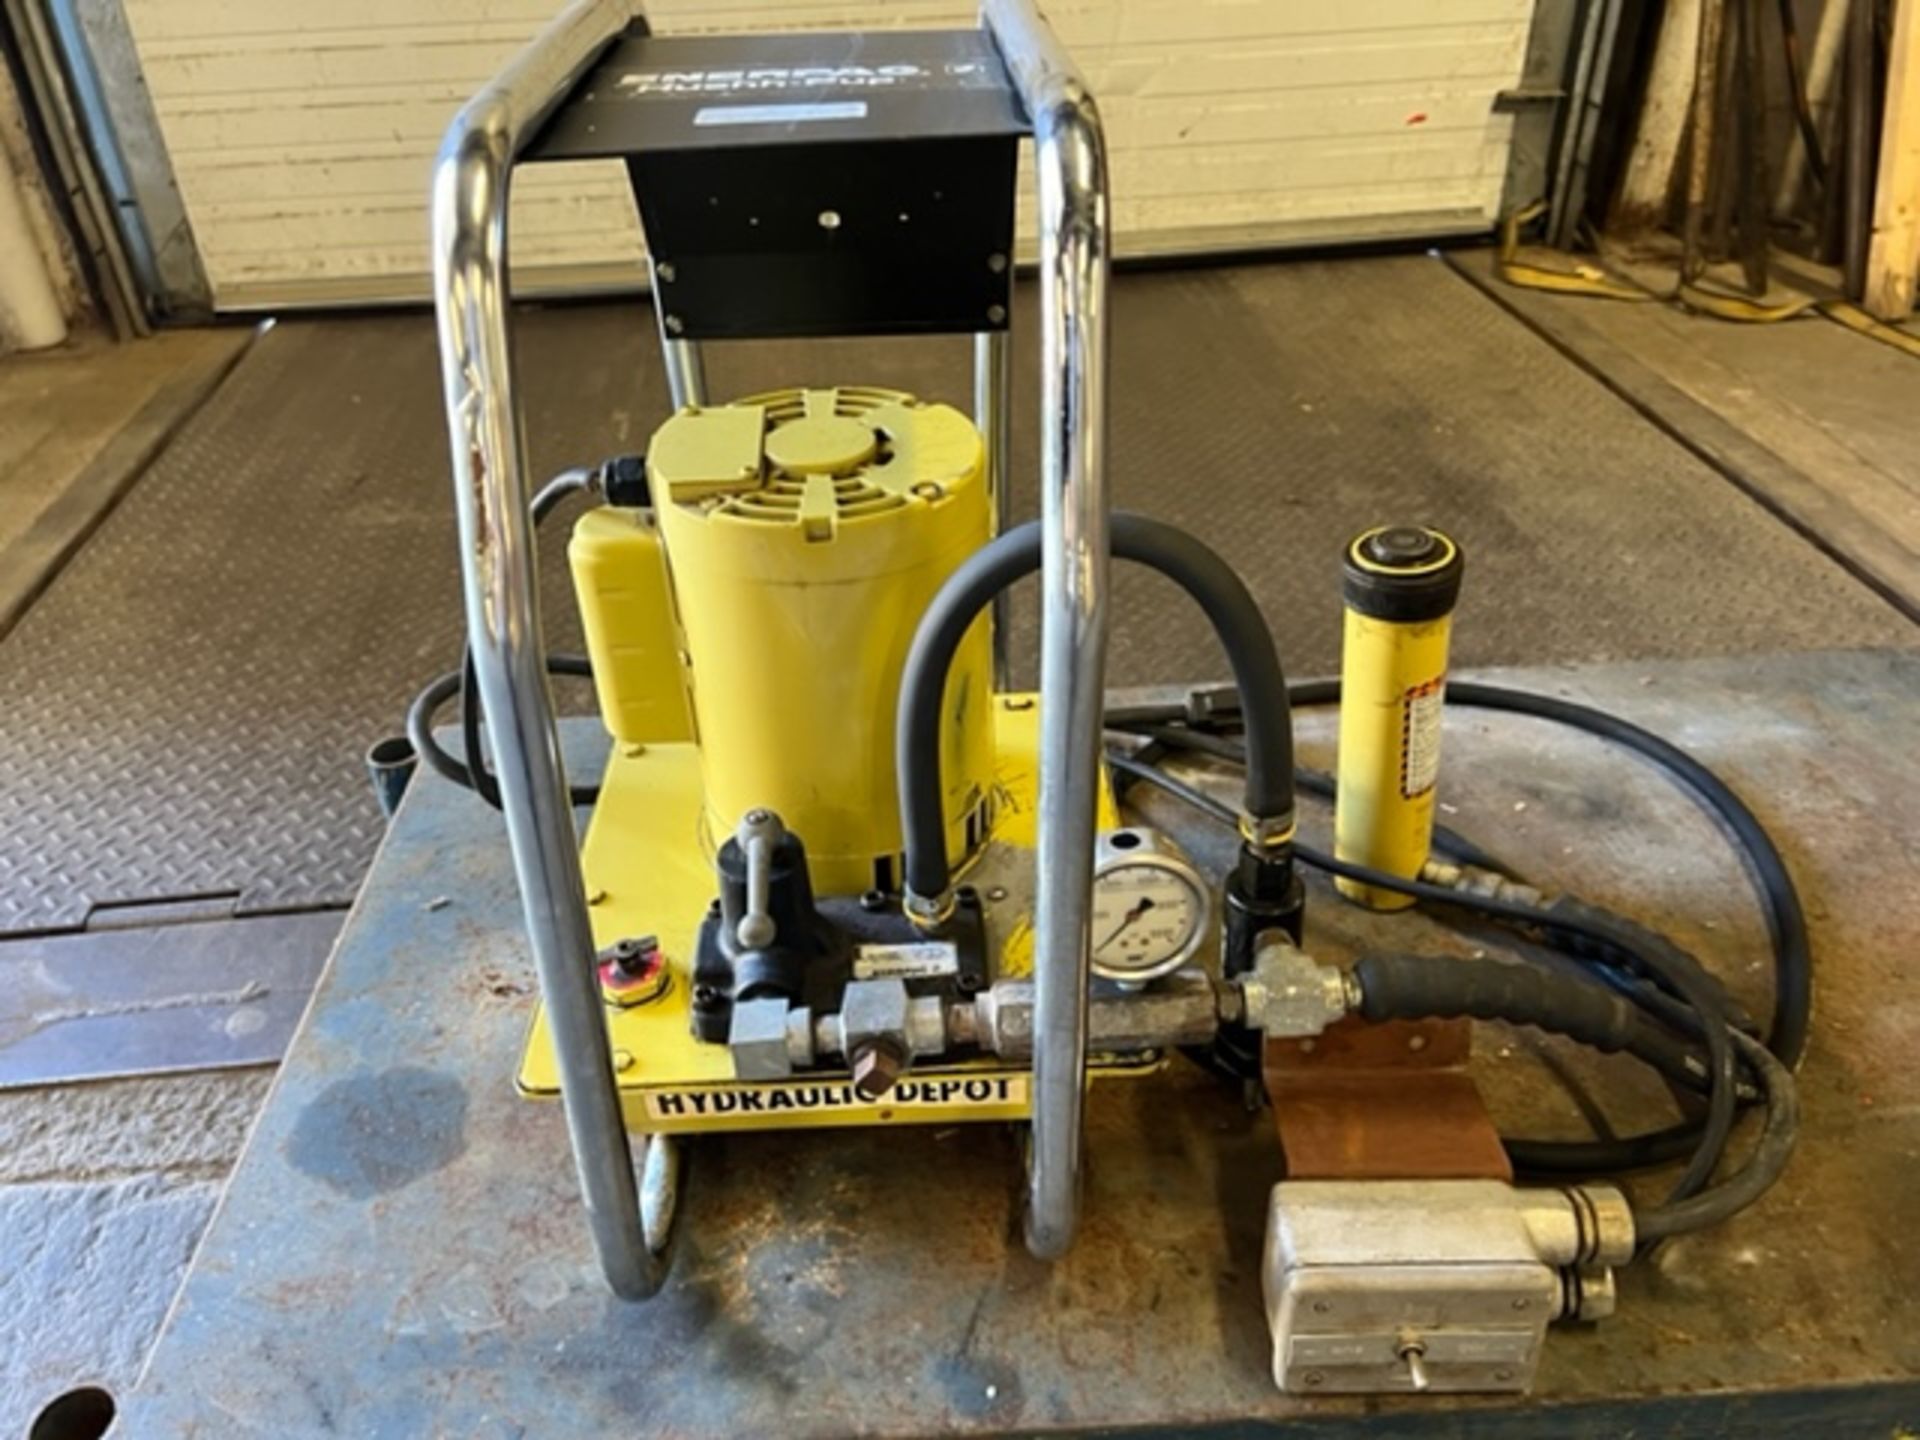 Enerpac Hushh-Pup Powerpack Pump hydraulic Cylinder Nice system